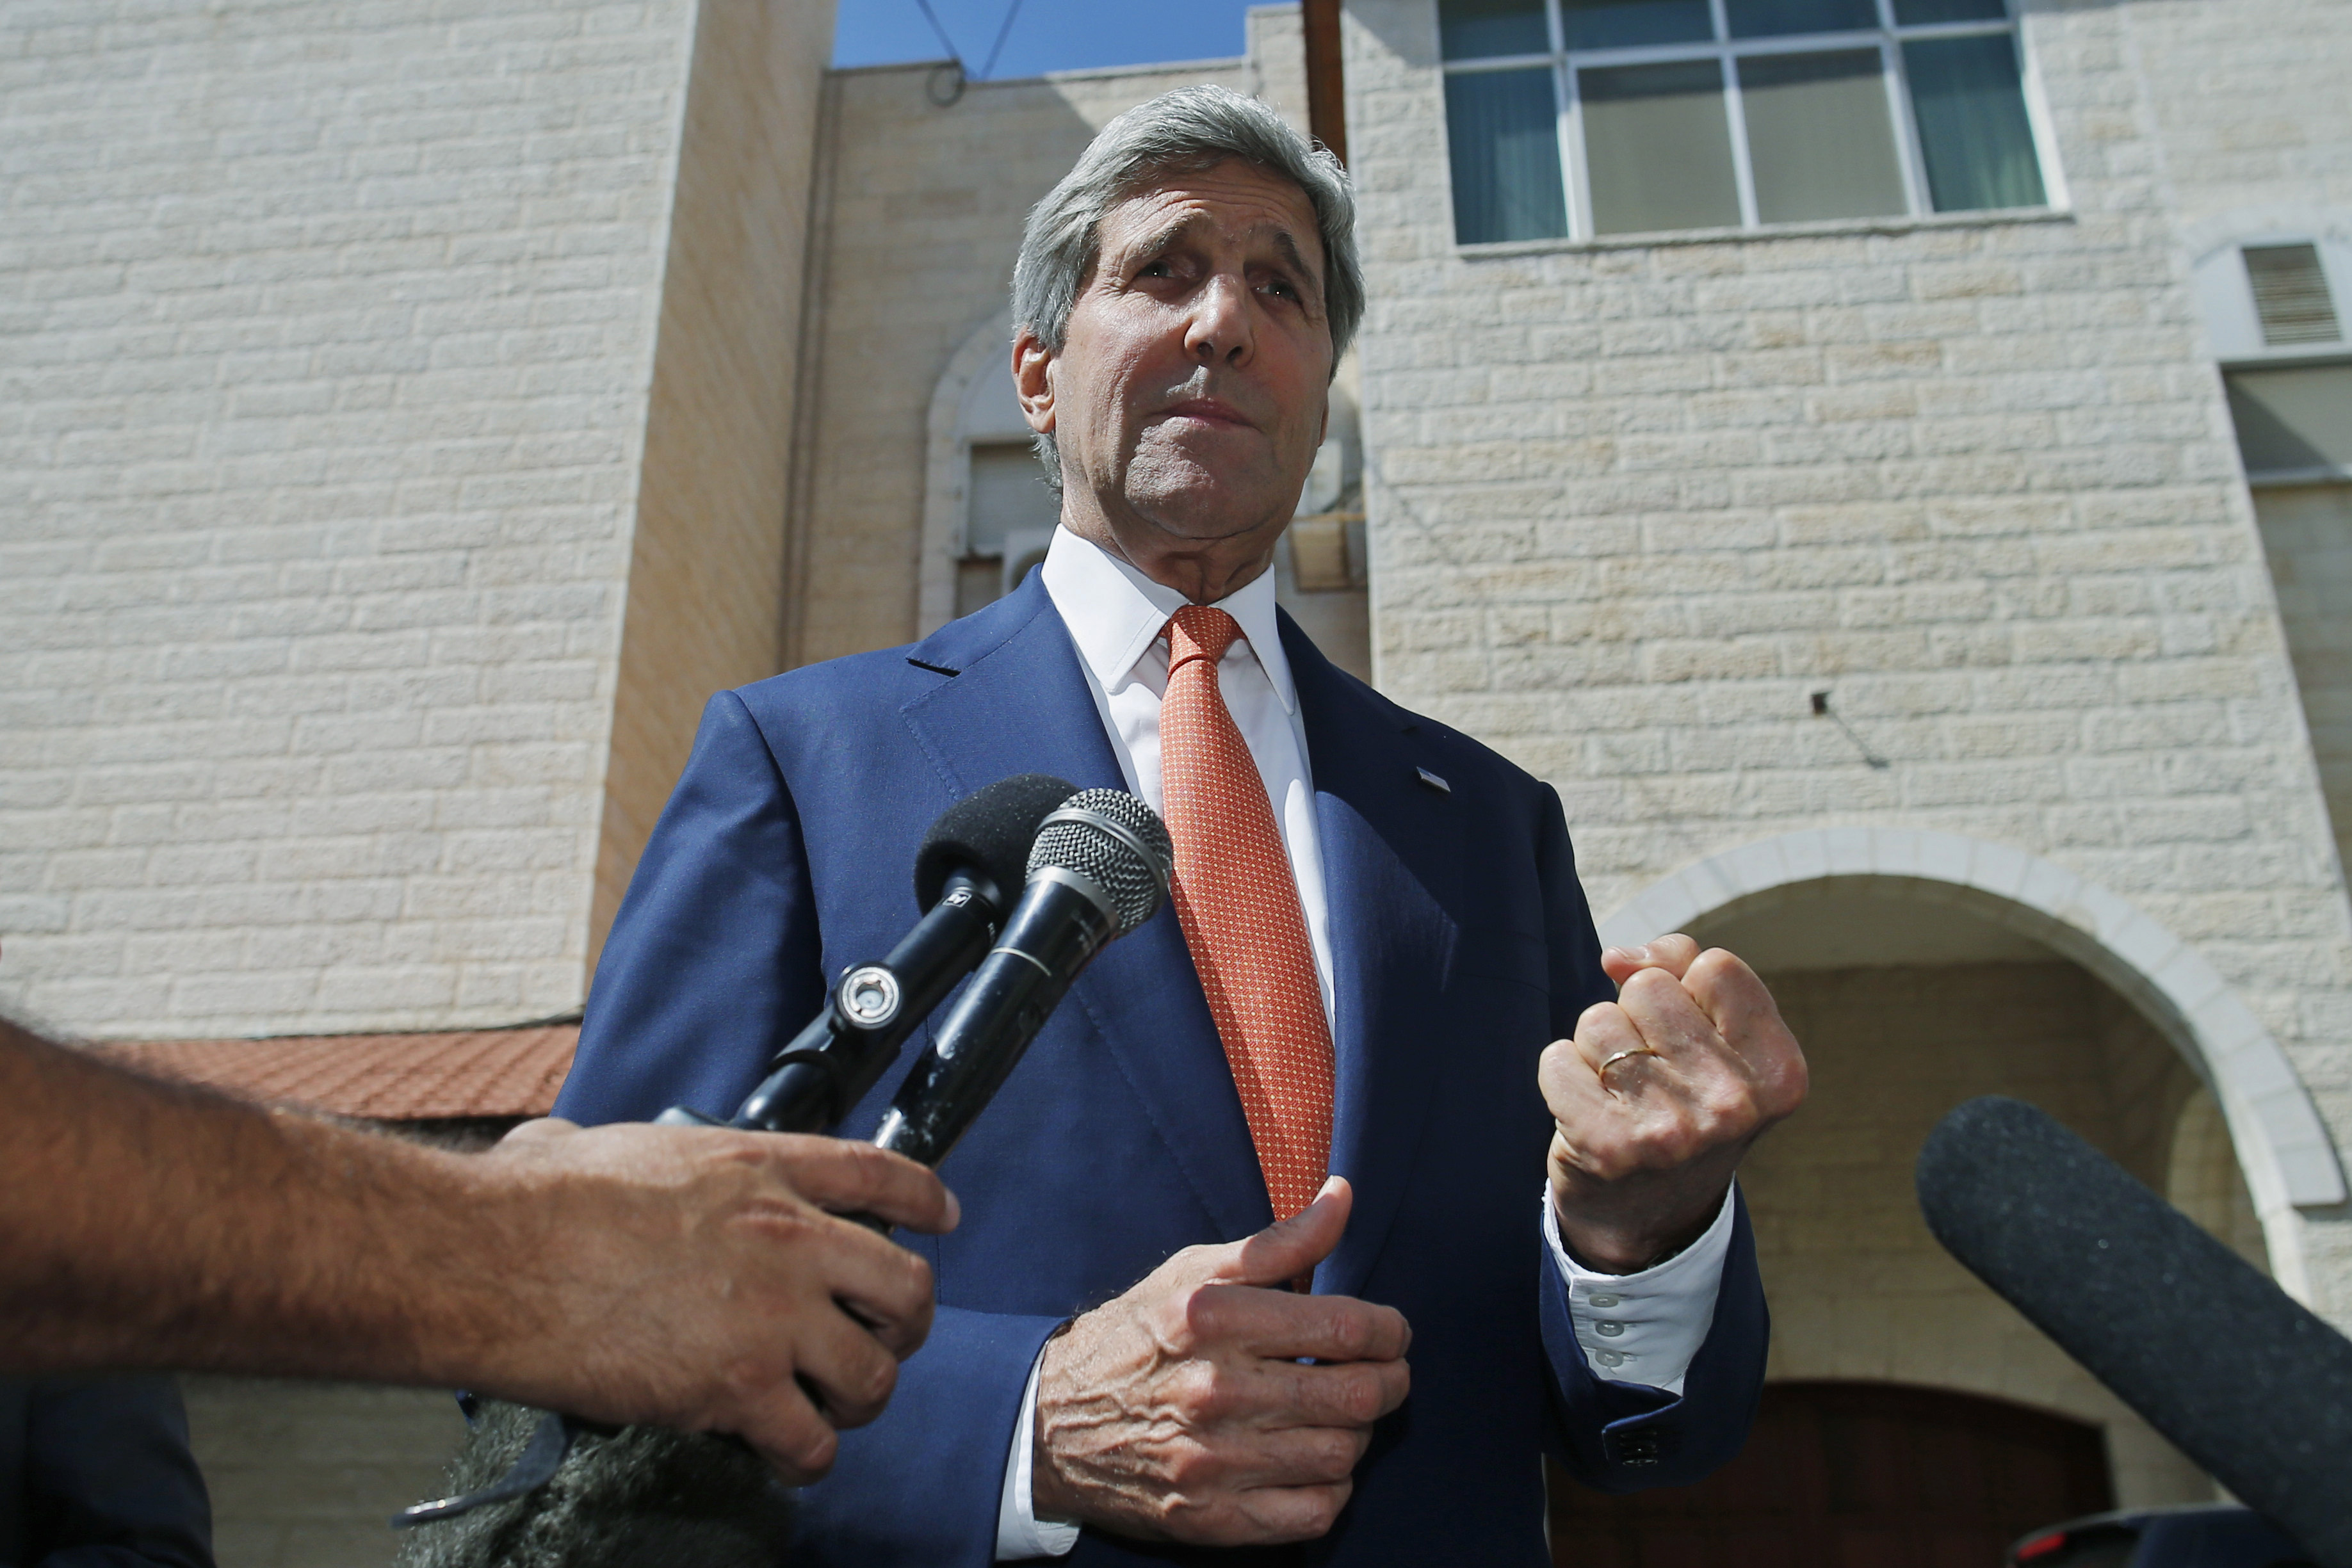 U.S. Secretary of State John Kerry speaks to reporters after meeting with Palestinian President Mahmoud Abbas in the West Bank city of Ramallah on July 23, 2014. (AP)